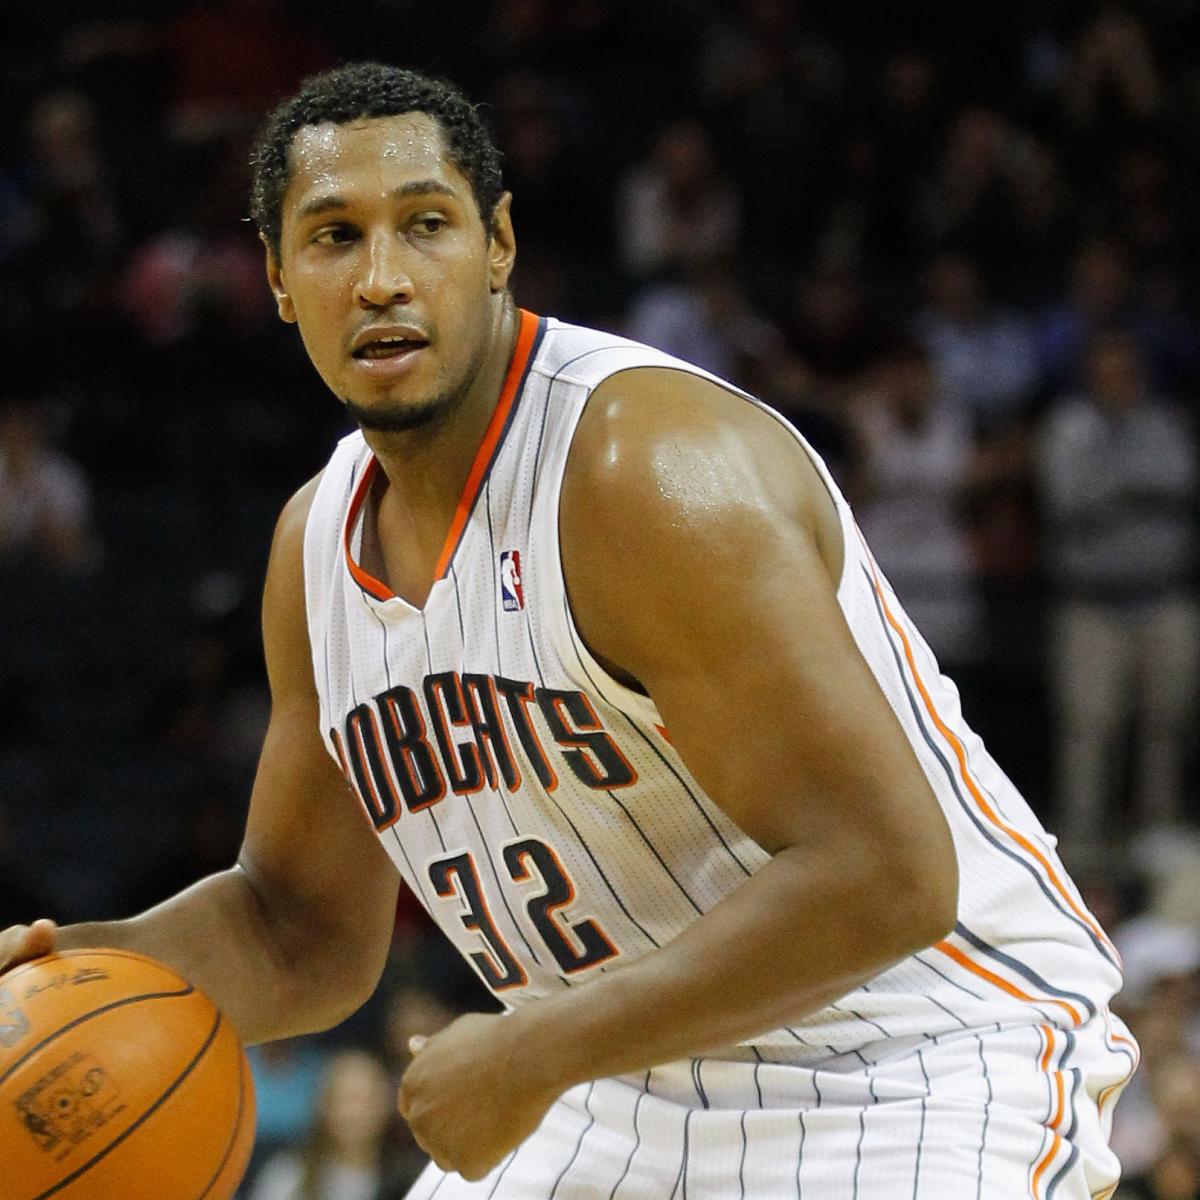 NBA Rumors: Boris Diaw and Charlotte Bobcats Reportedly Agree to